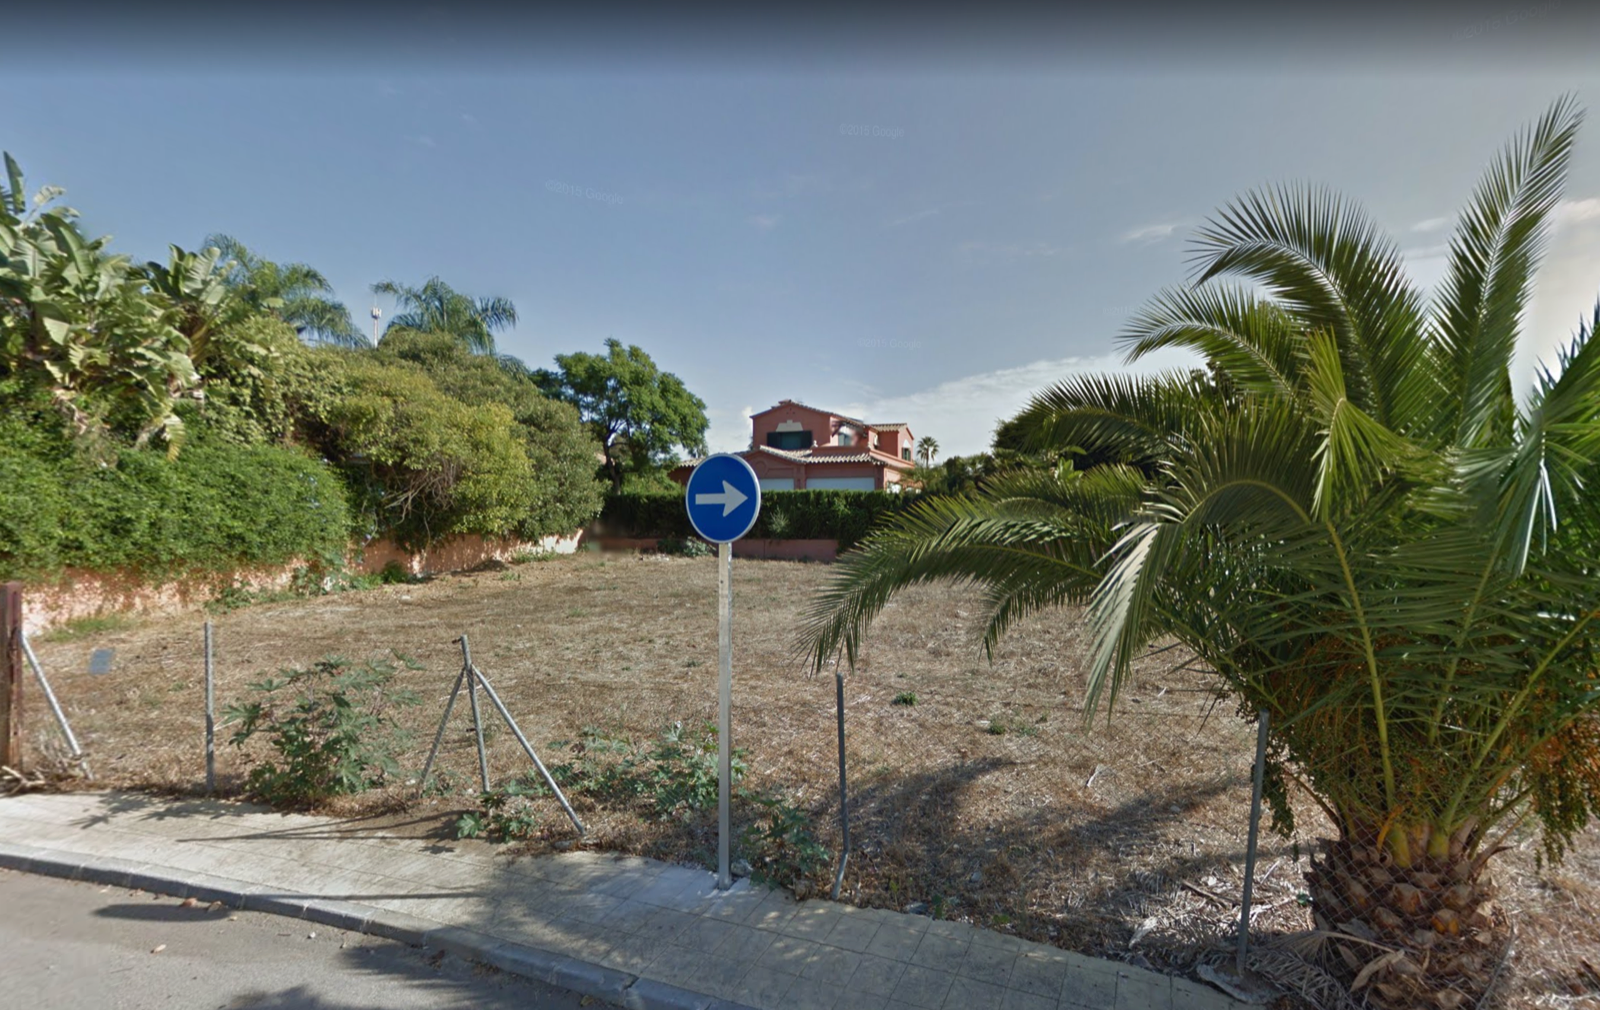 Plot with great villa project with license in place to start building immediately in Guadalmina Baja. Very hot deal!!!